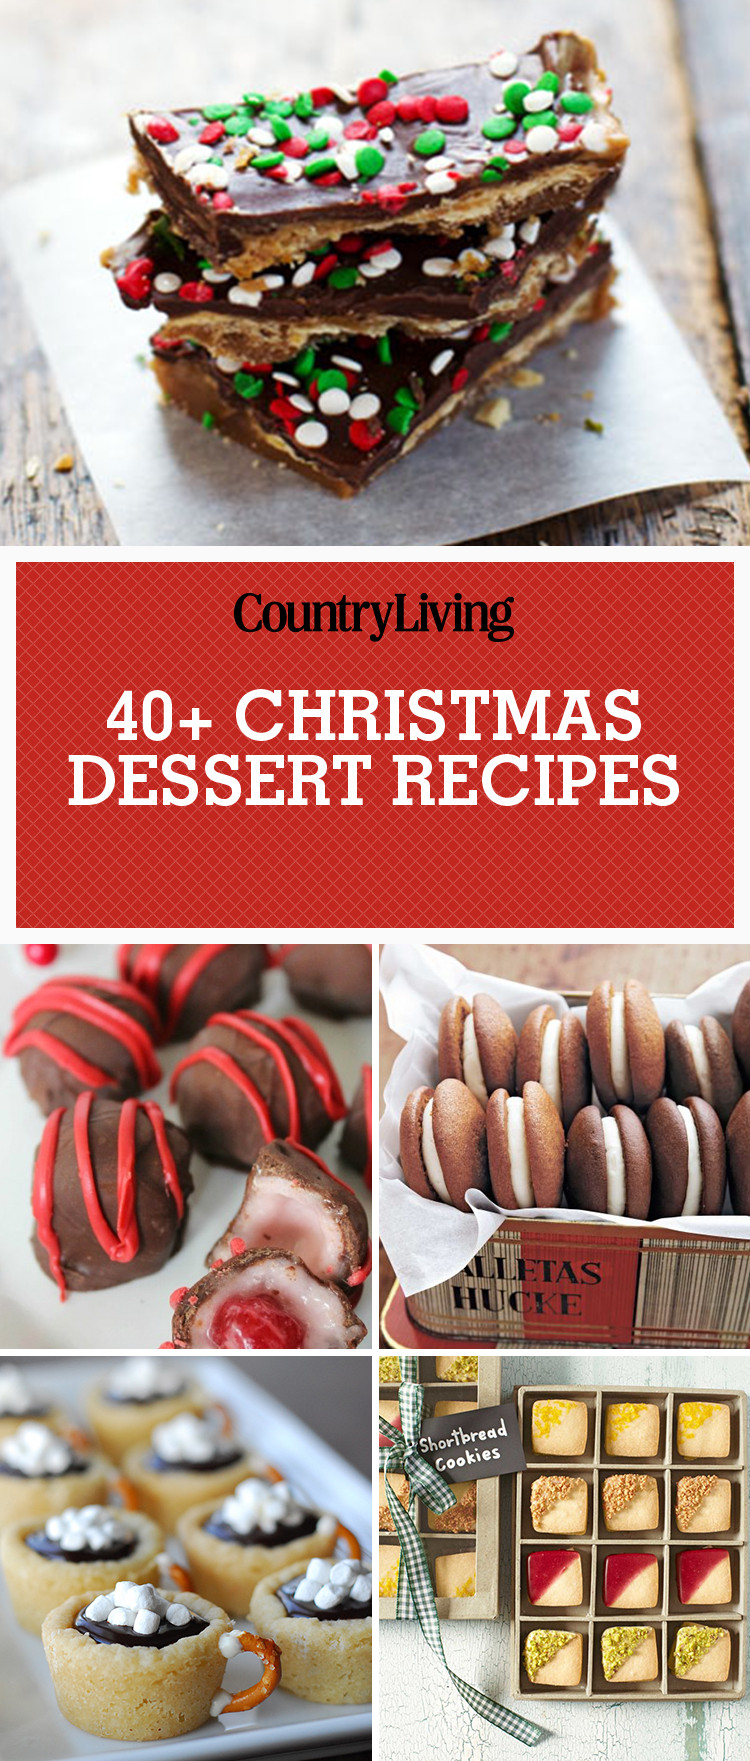 Easy Christmas Desserts Pinterest
 45 Easy Christmas Desserts Best Recipes and Ideas for